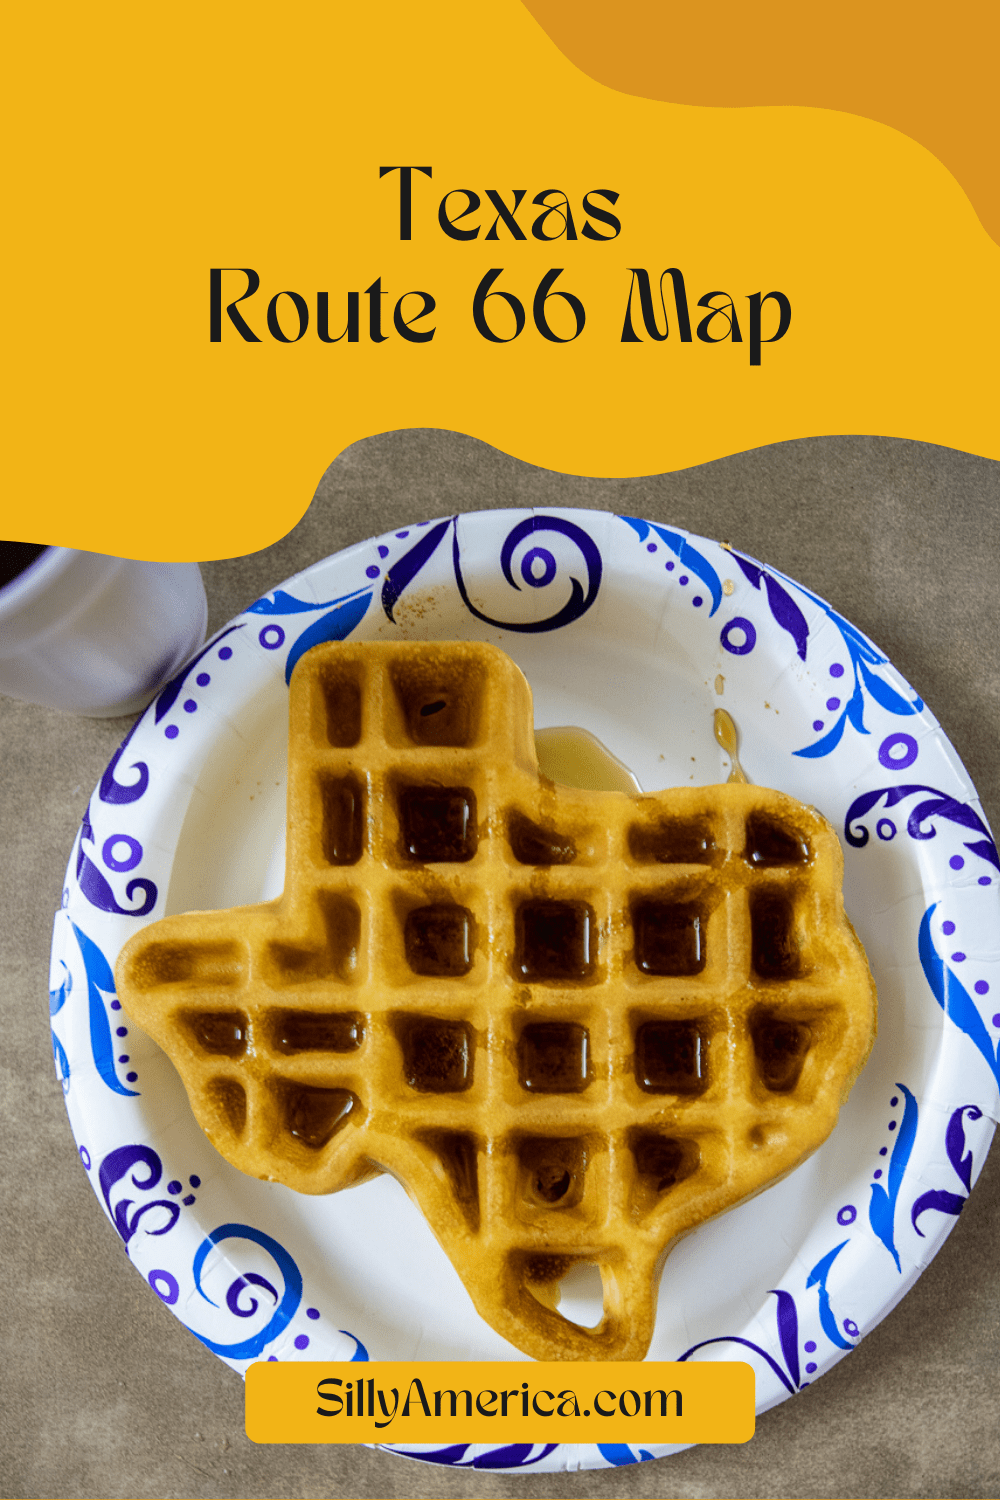 If you're planning a Route 66 road trip you need to know what to see and where to go. Our Texas Route 66 map contains all the best stops in the state. We've mapped out all the biggest and best roadside attractions, visitor centers, museums, restaurants, diners, fast food, vintage motels, and other iconic stops on this Route 66 Texas map. #Route66 #Texas #Route66RoadTrip #TexasRoute66 #TexasRoute66RoadTrip #TexasRoadTrip #travel #RoadTrip